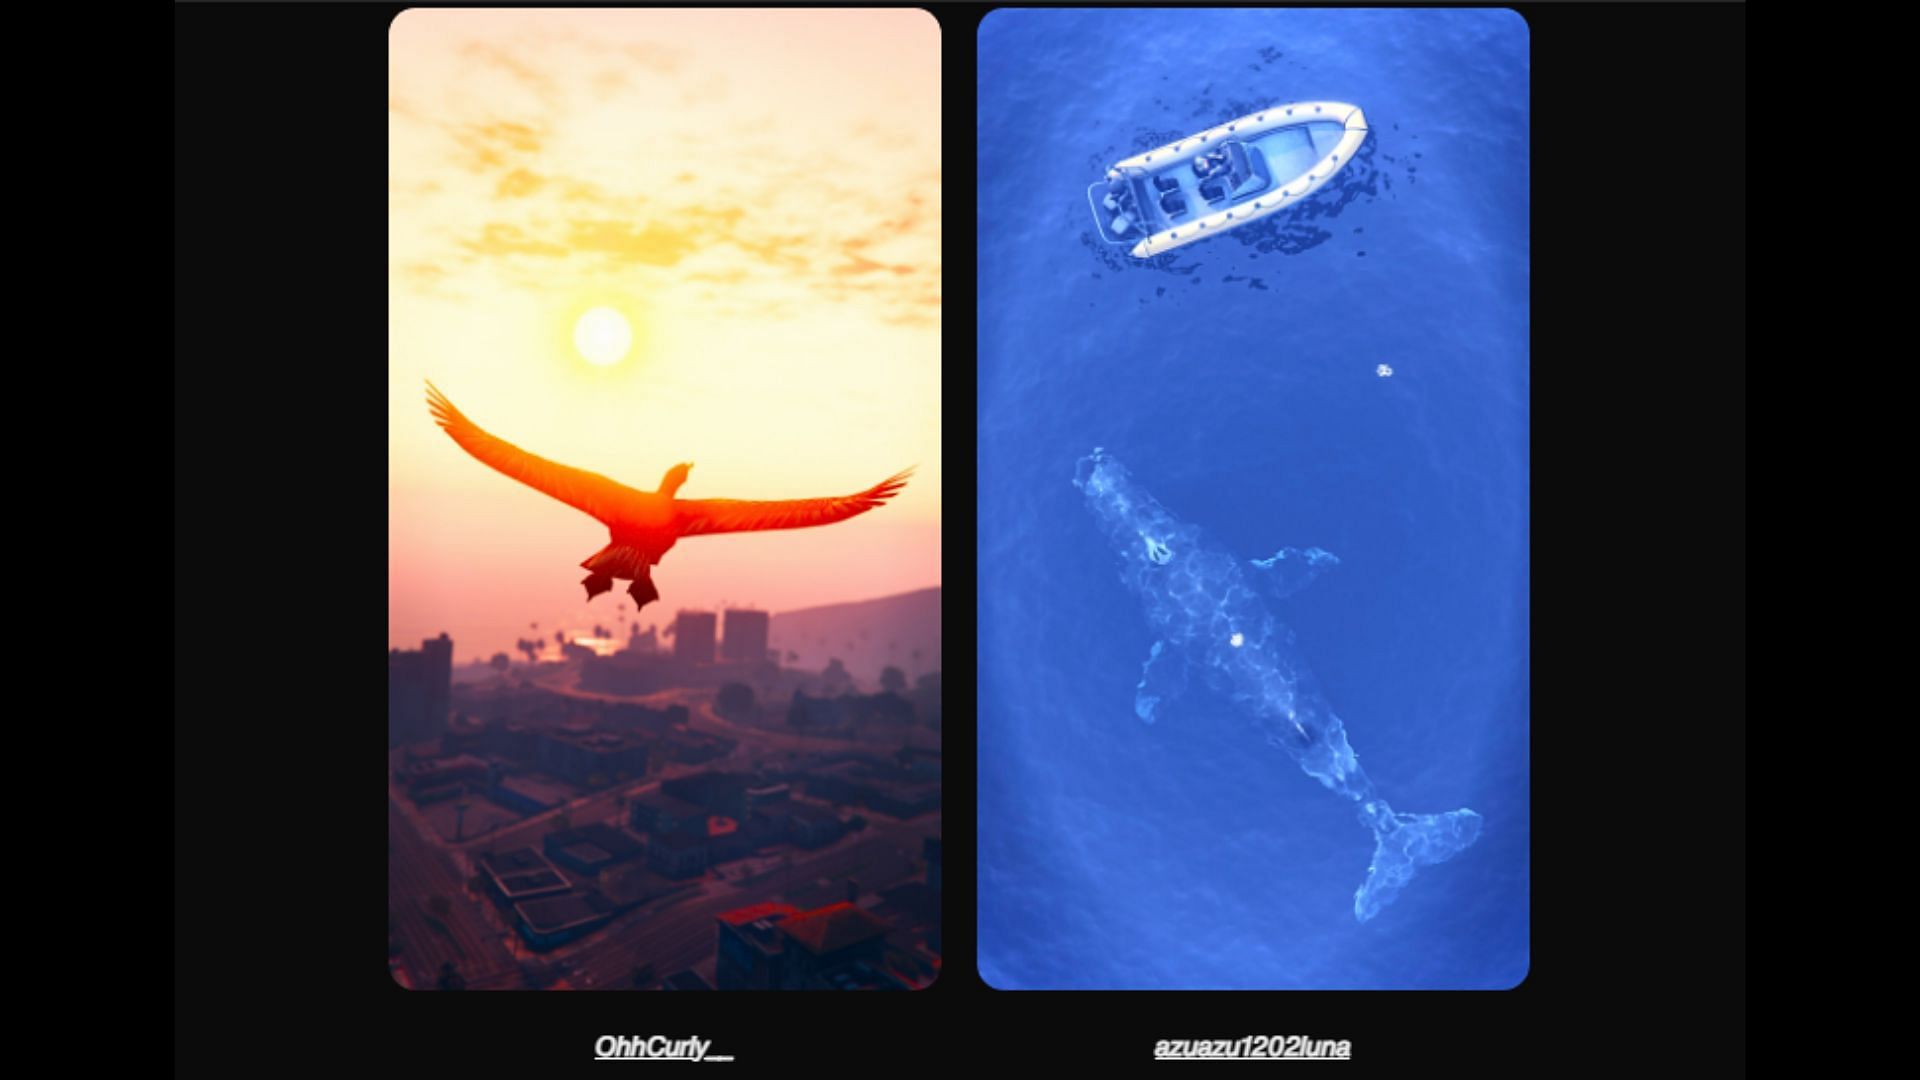 Some images from the Wildlife Photography Community Showcase 2/2 (Image via Rockstar Games)